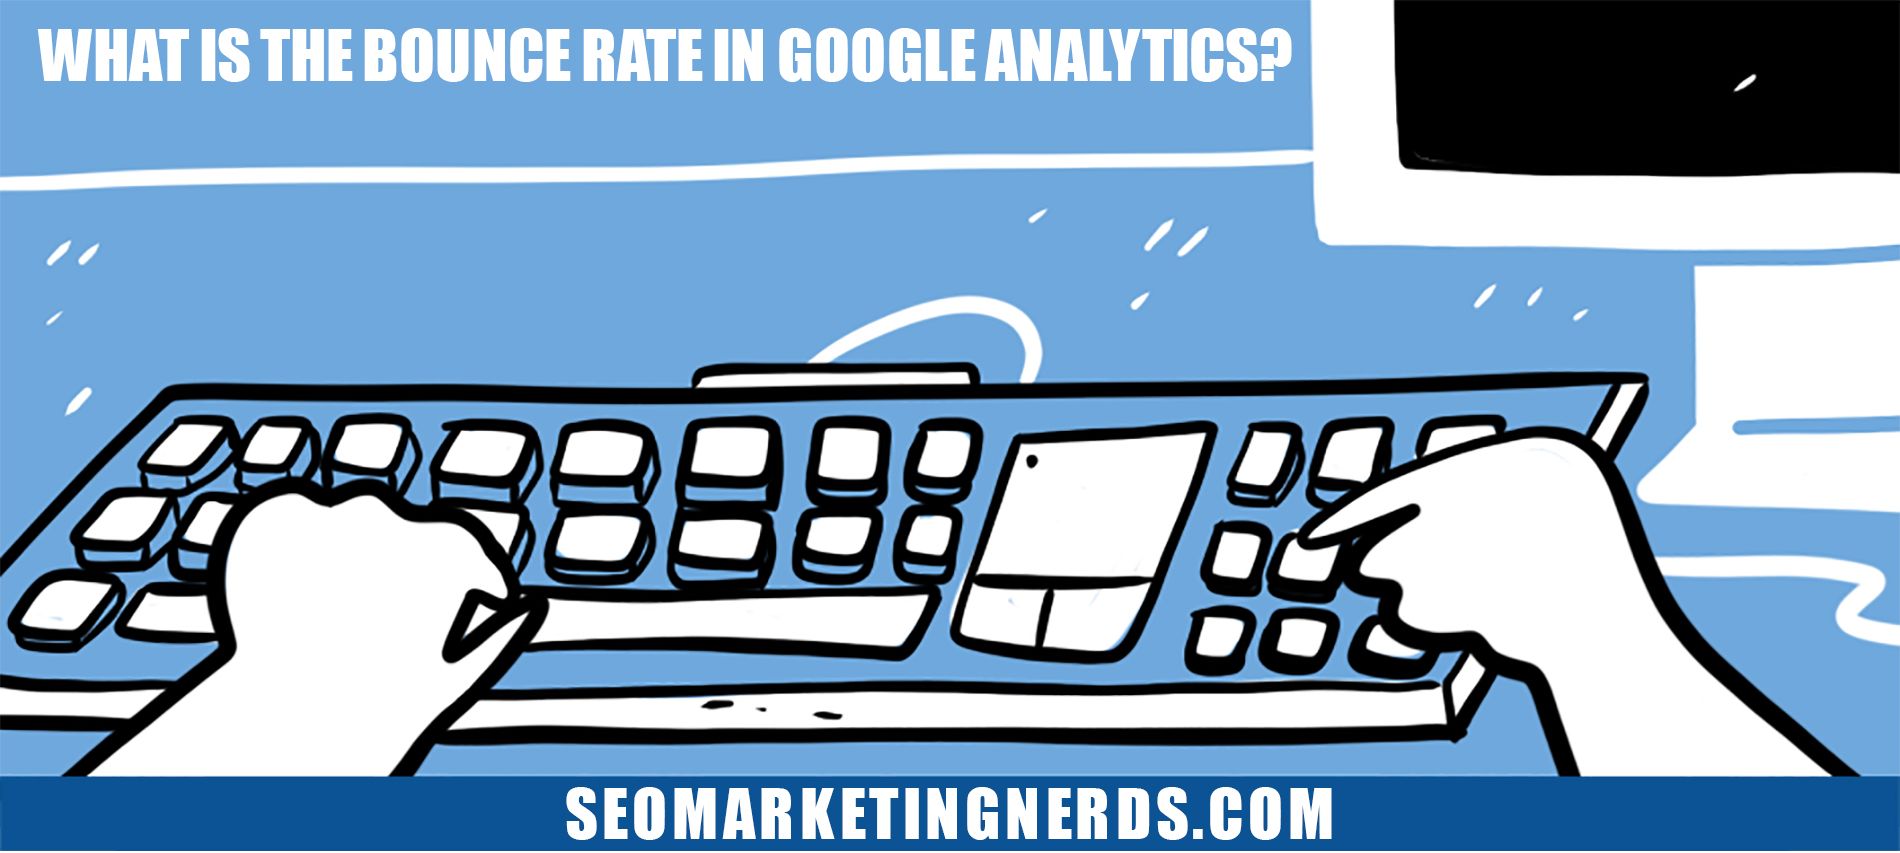 What is the bounce rate in Google Analytics?